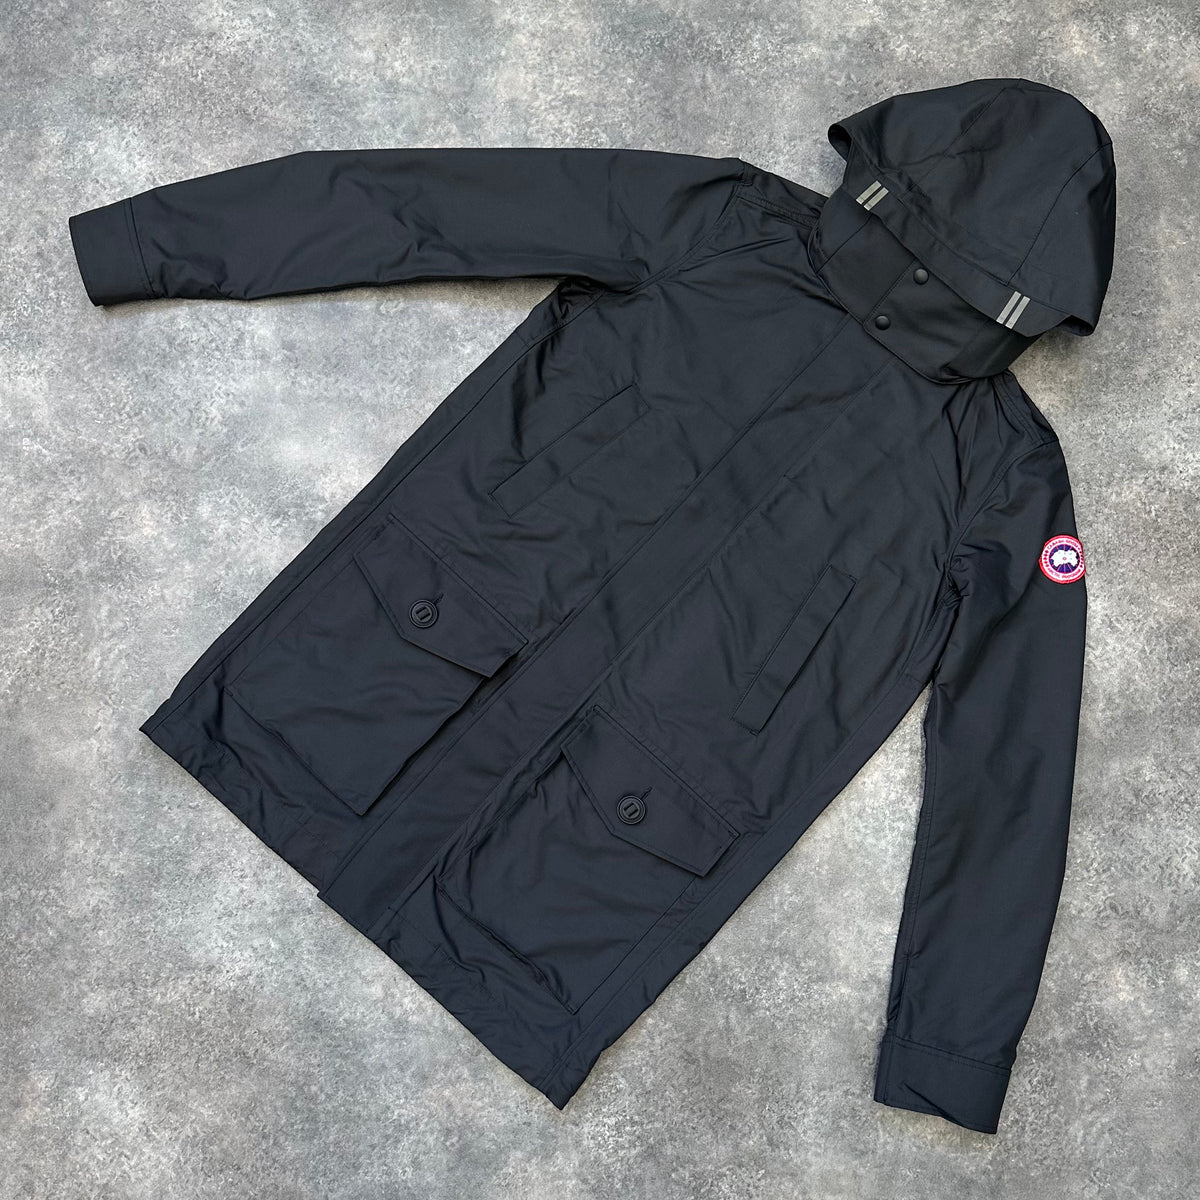 CANADA GOOSE CREW TRENCH HOODED LINED JACKET BLACK